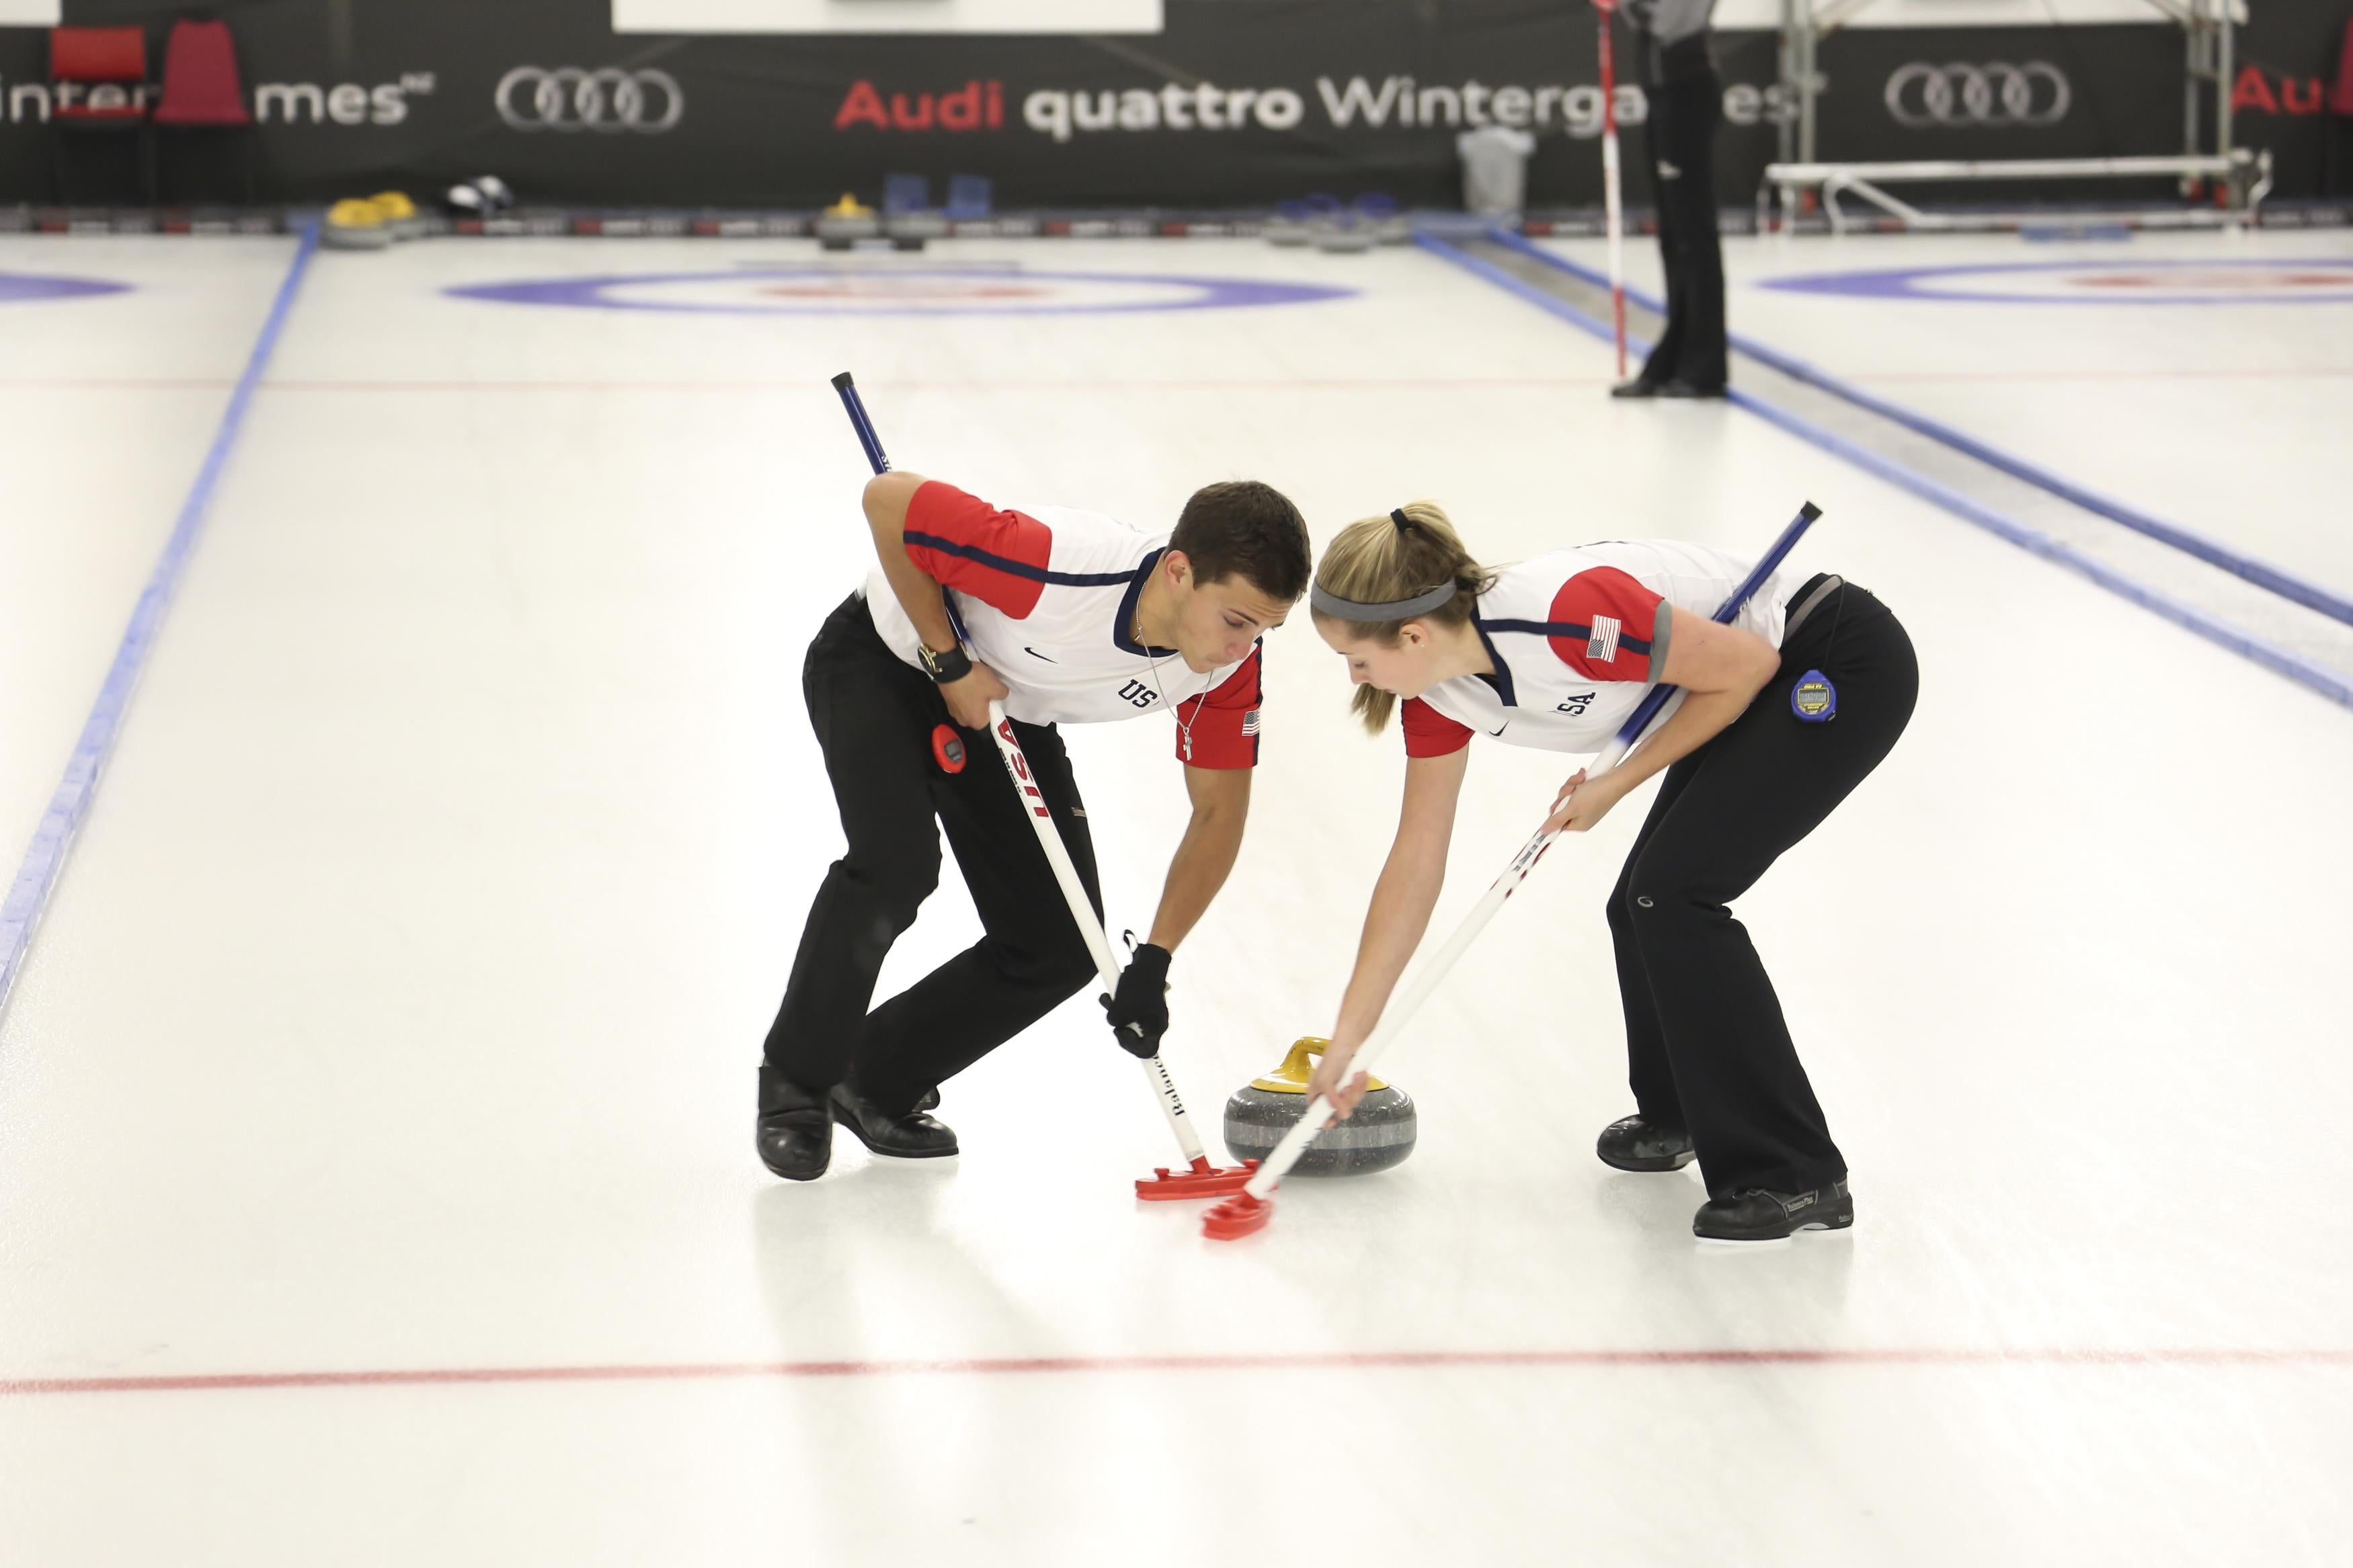 Get to know the new Olympic event of mixed doubles curling.